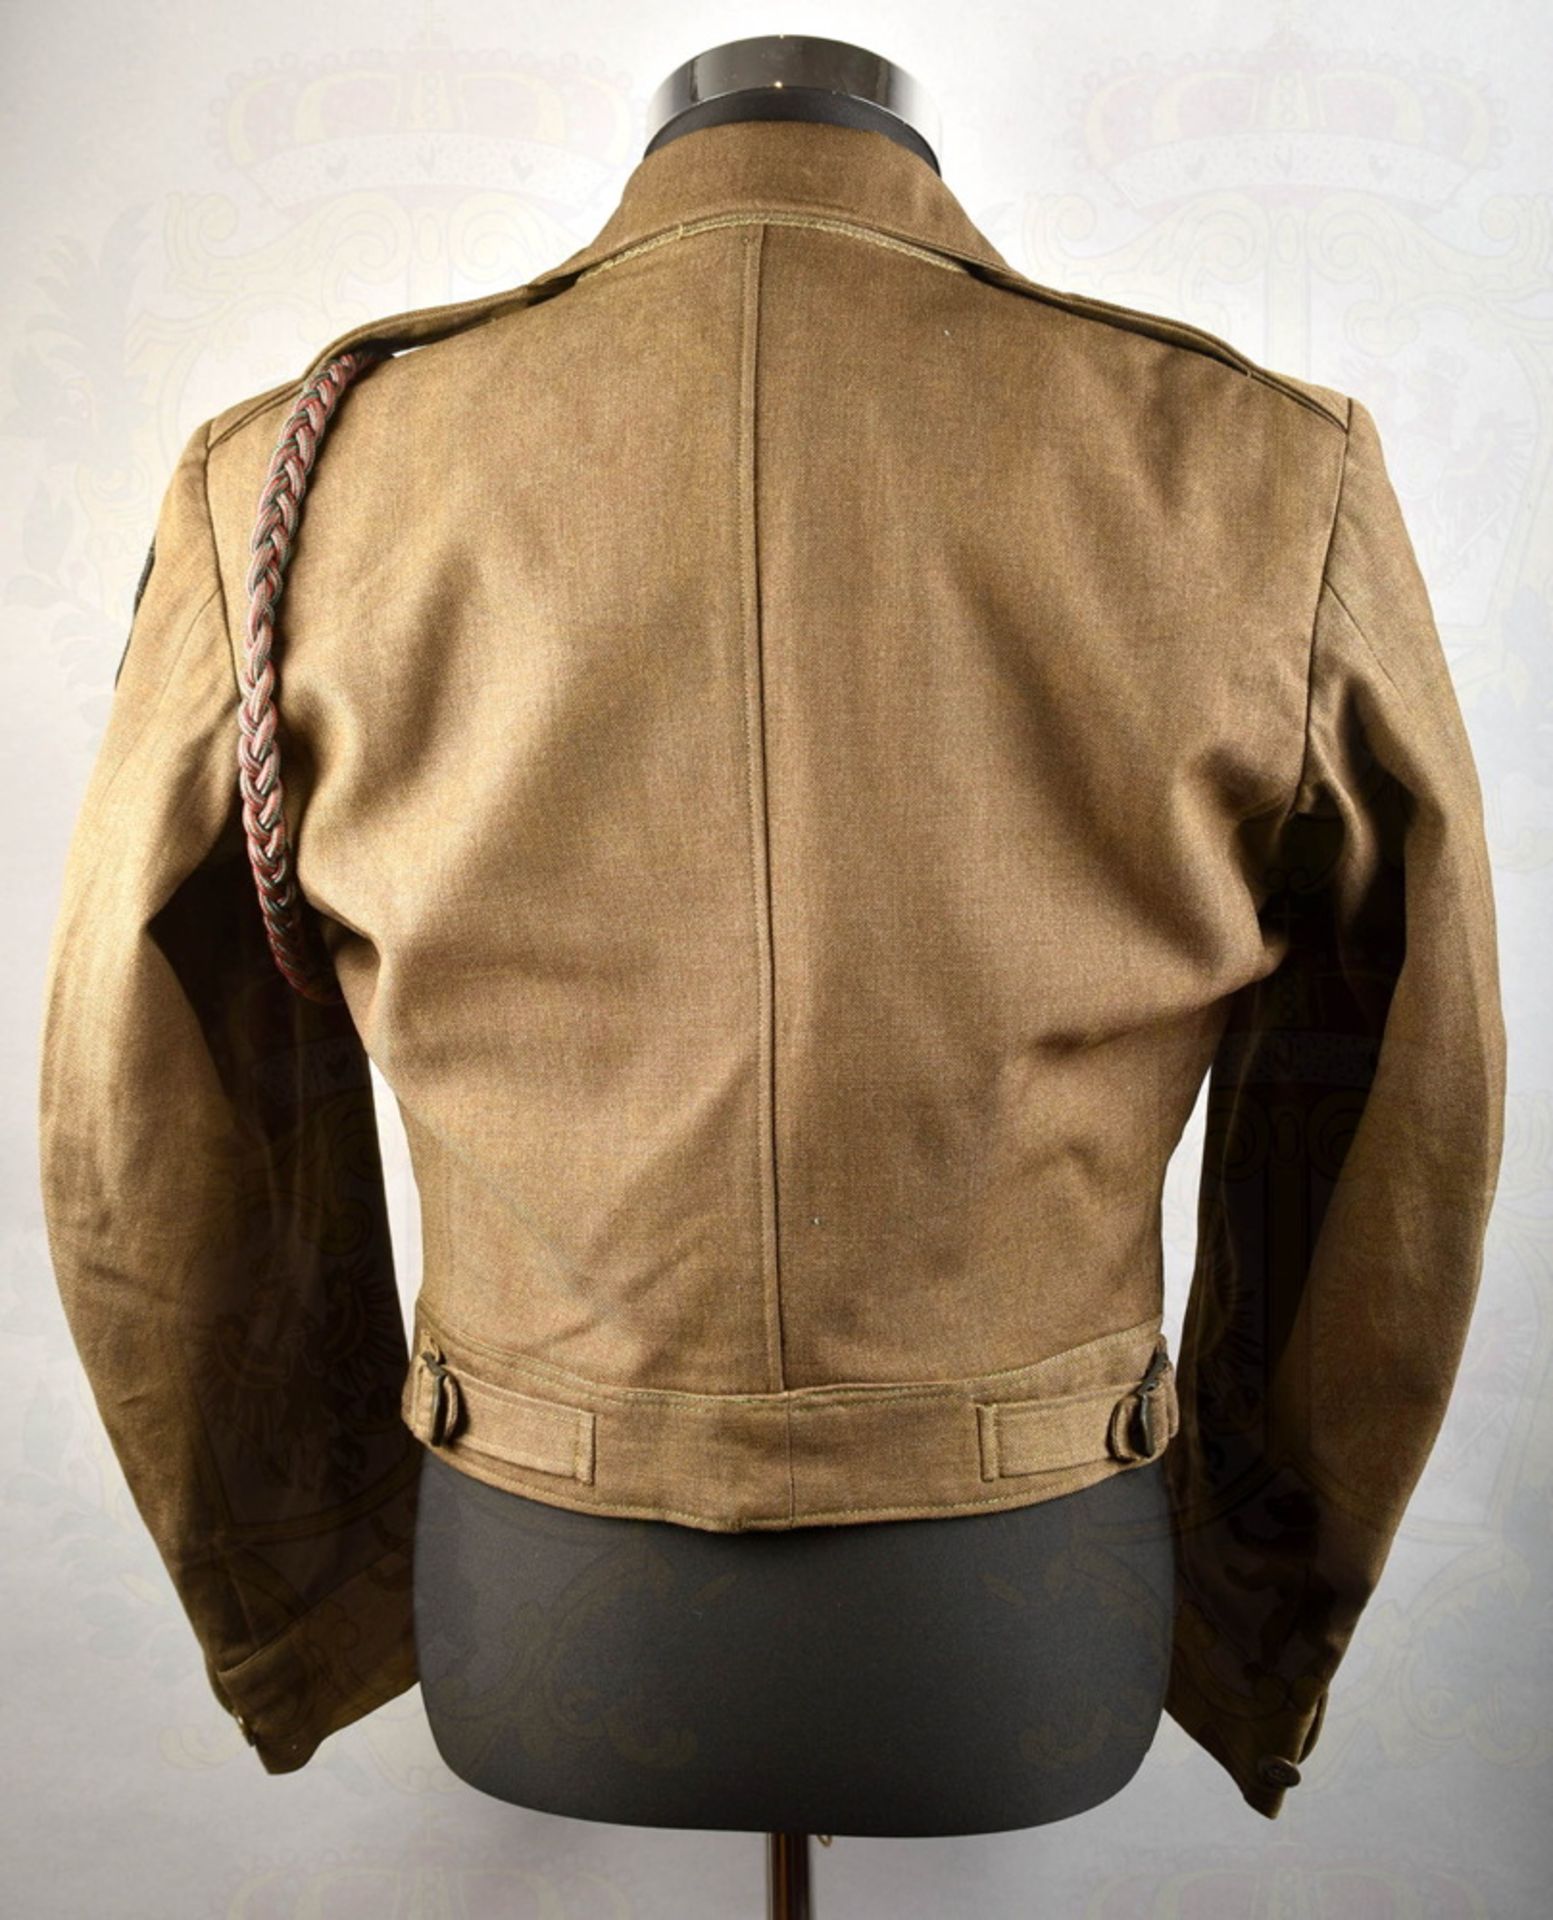 Uniform of the 101st Airborne Division - Image 3 of 6